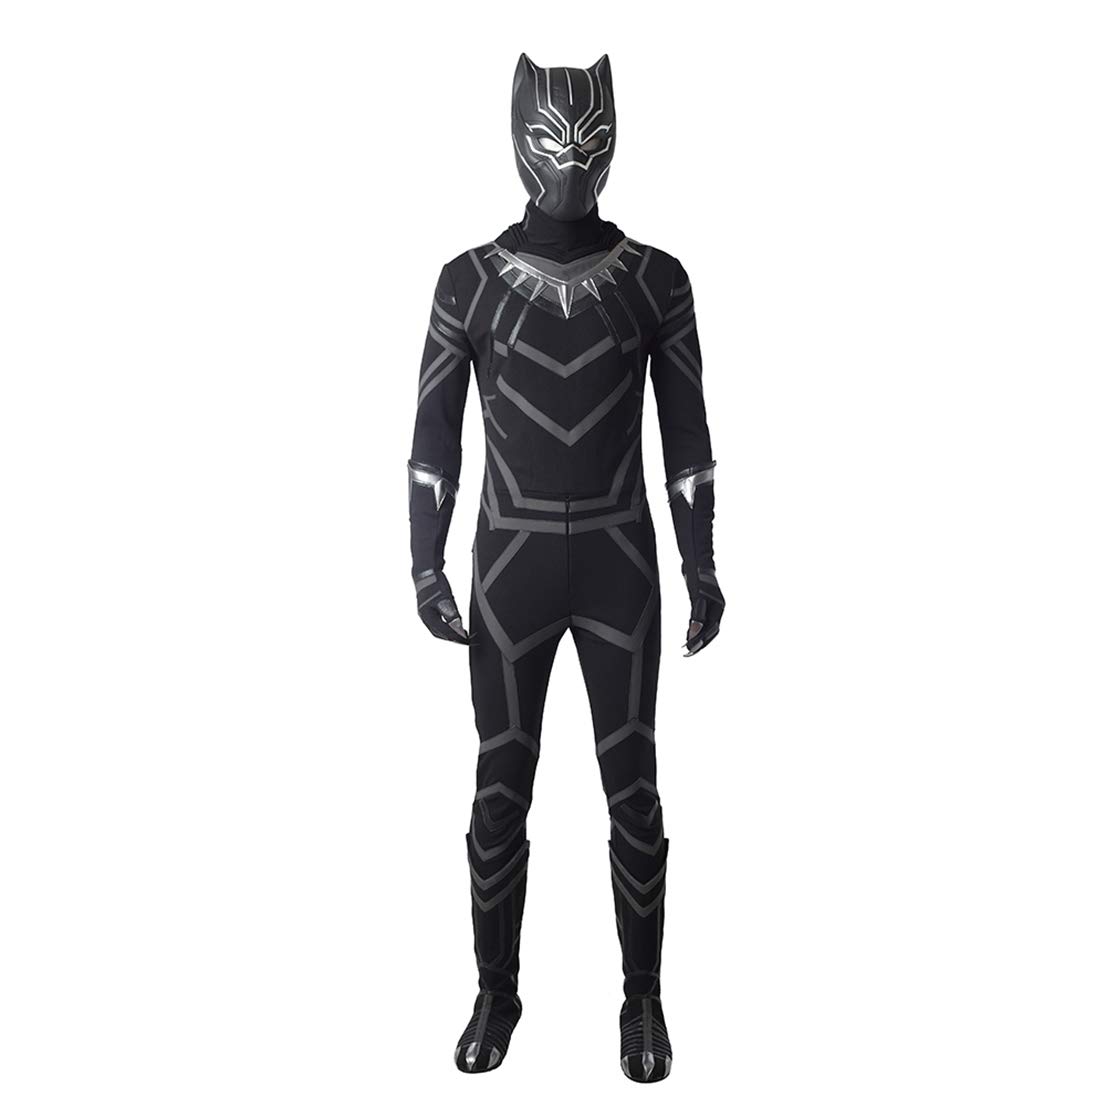 Black panther marvel superhero cosplay costume bodysuit jumpsuit for kids aldult halloween carnival party cosplay costumes